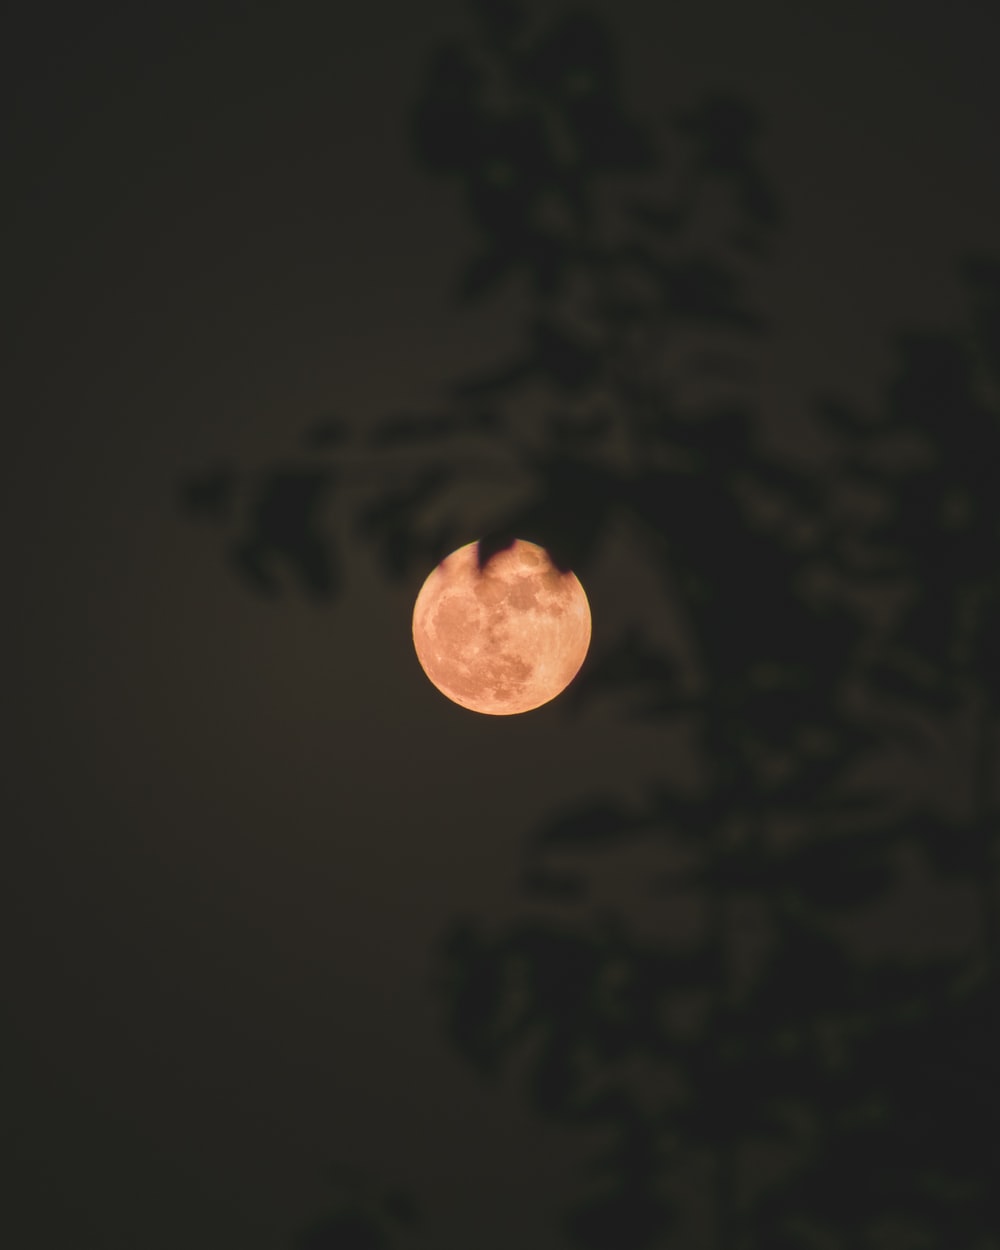 Yellow Moon Picture. Download Free Image